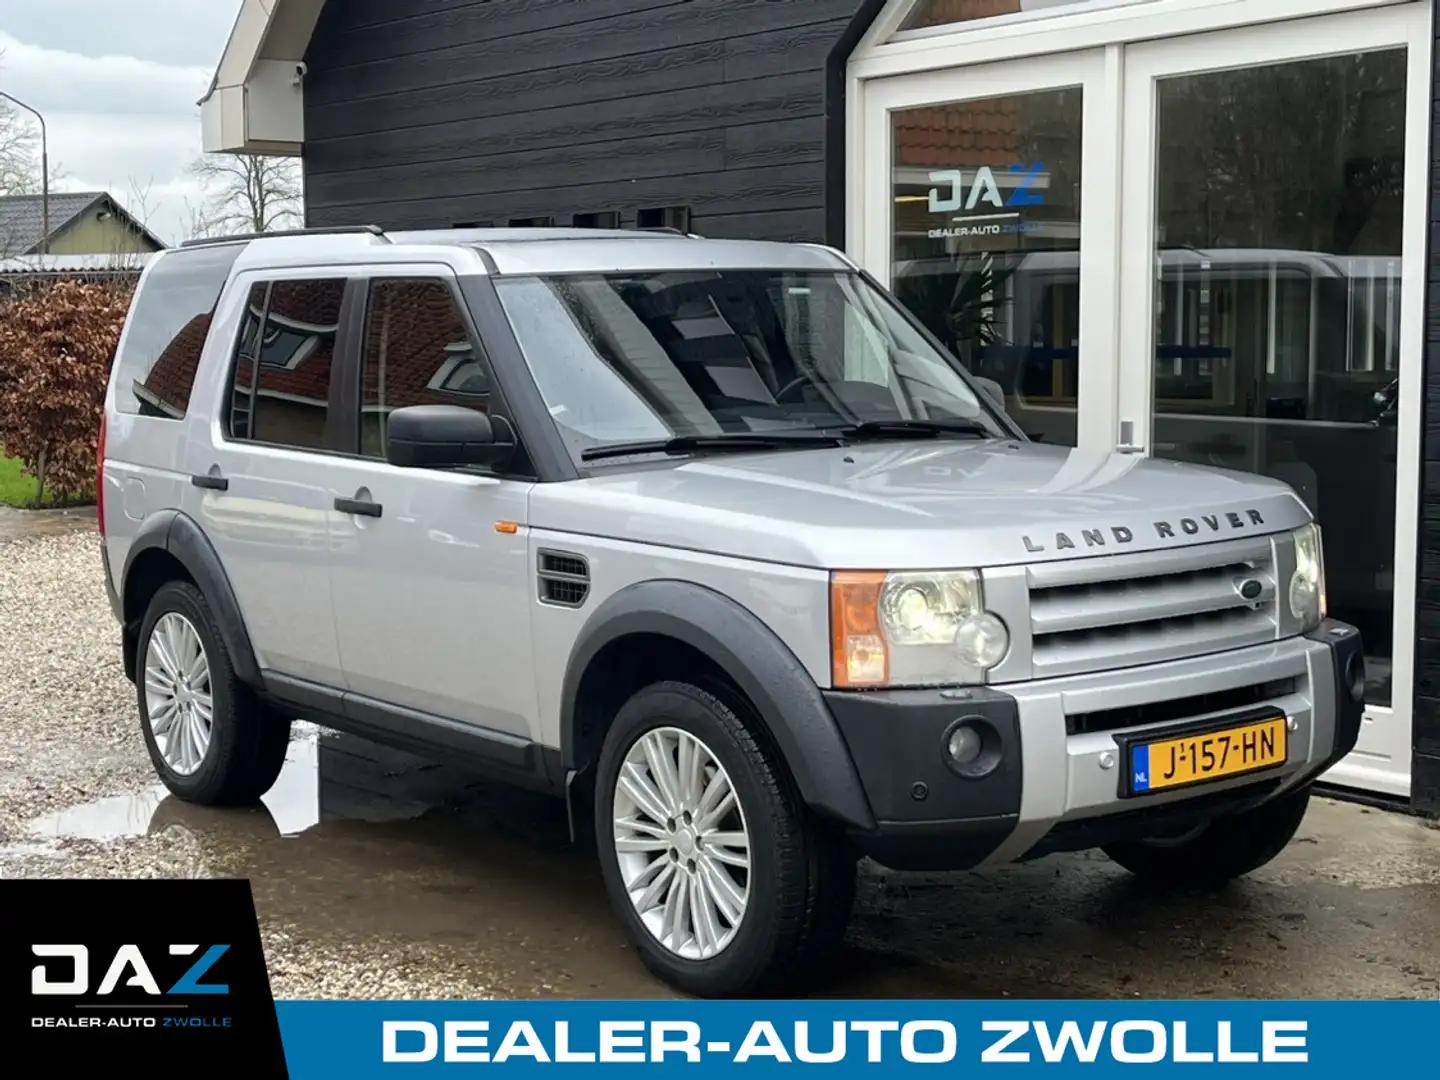 Land Rover Discovery 4.4 V8 SE 7 Pers./Aut/Ecc/Navi/Dak/Youngtimer!! in siva - 1